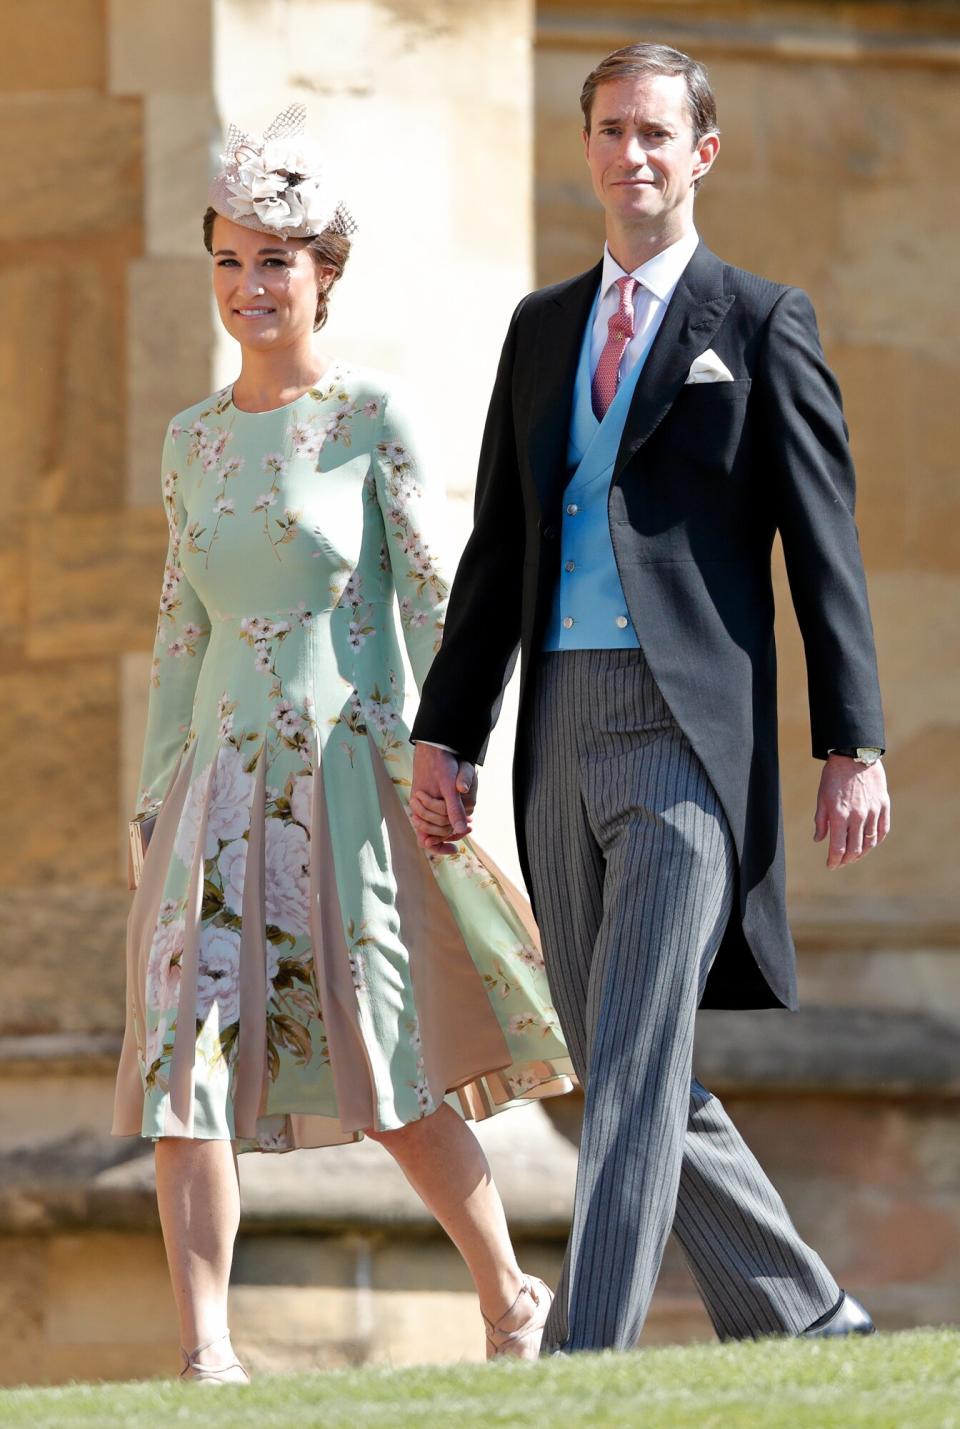 Pippa Middleton and James Matthews attend the wedding of Prince Harry to Ms Meghan Markle at St George's Chapel, Windsor Castle on May 19, 2018 in Windsor, England. Prince Henry Charles Albert David of Wales marries Ms. Meghan Markle in a service at St George's Chapel inside the grounds of Windsor Castle. Among the guests were 2200 members of the public, the royal family and Ms. Markle's Mother Doria Ragland.